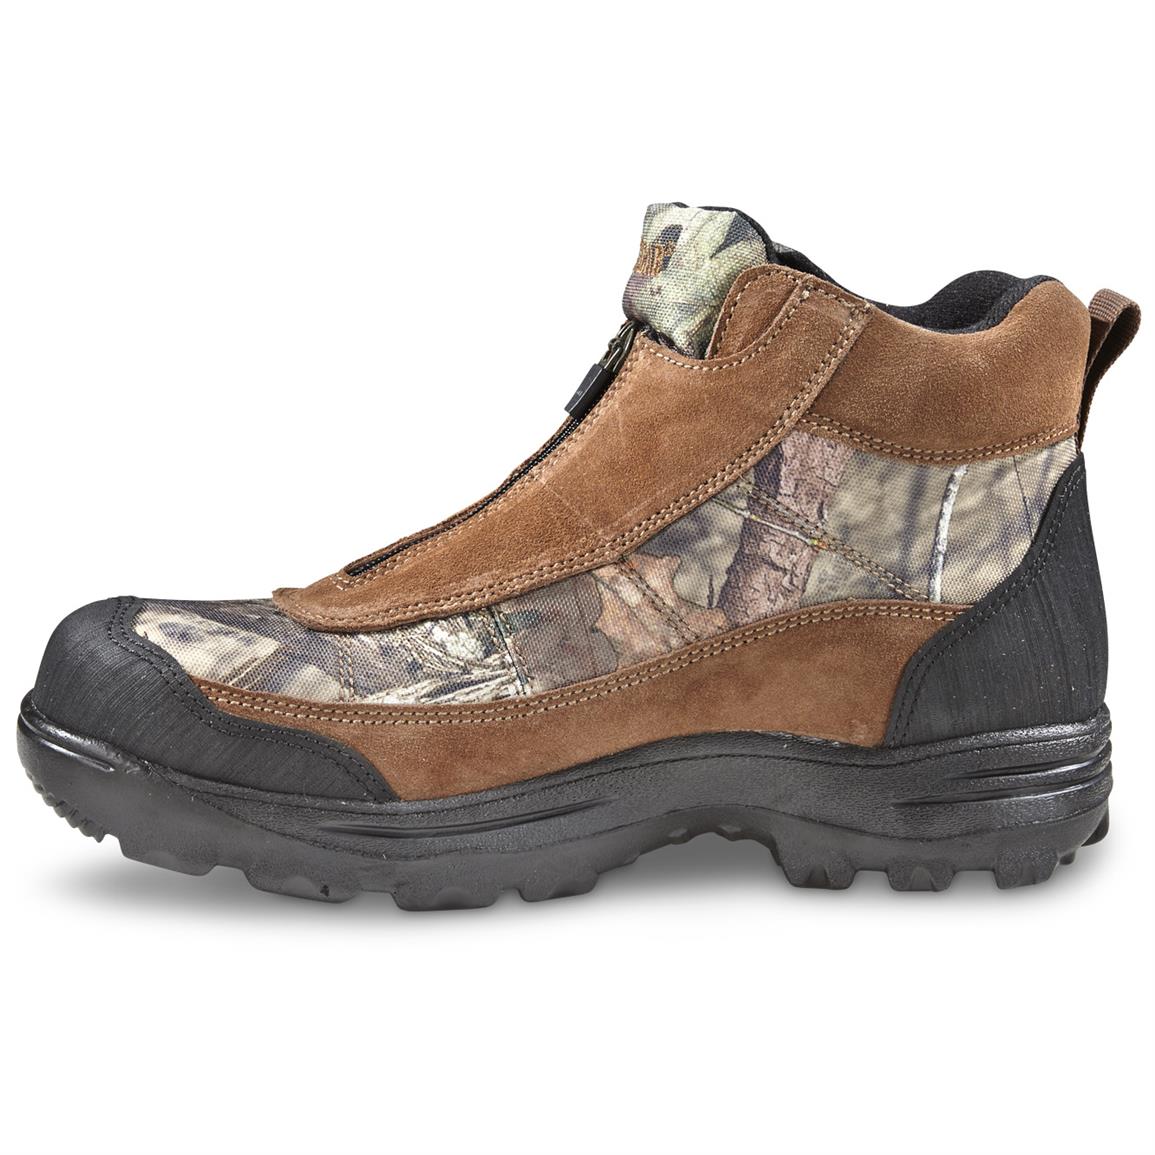 mens slip on hiking boots